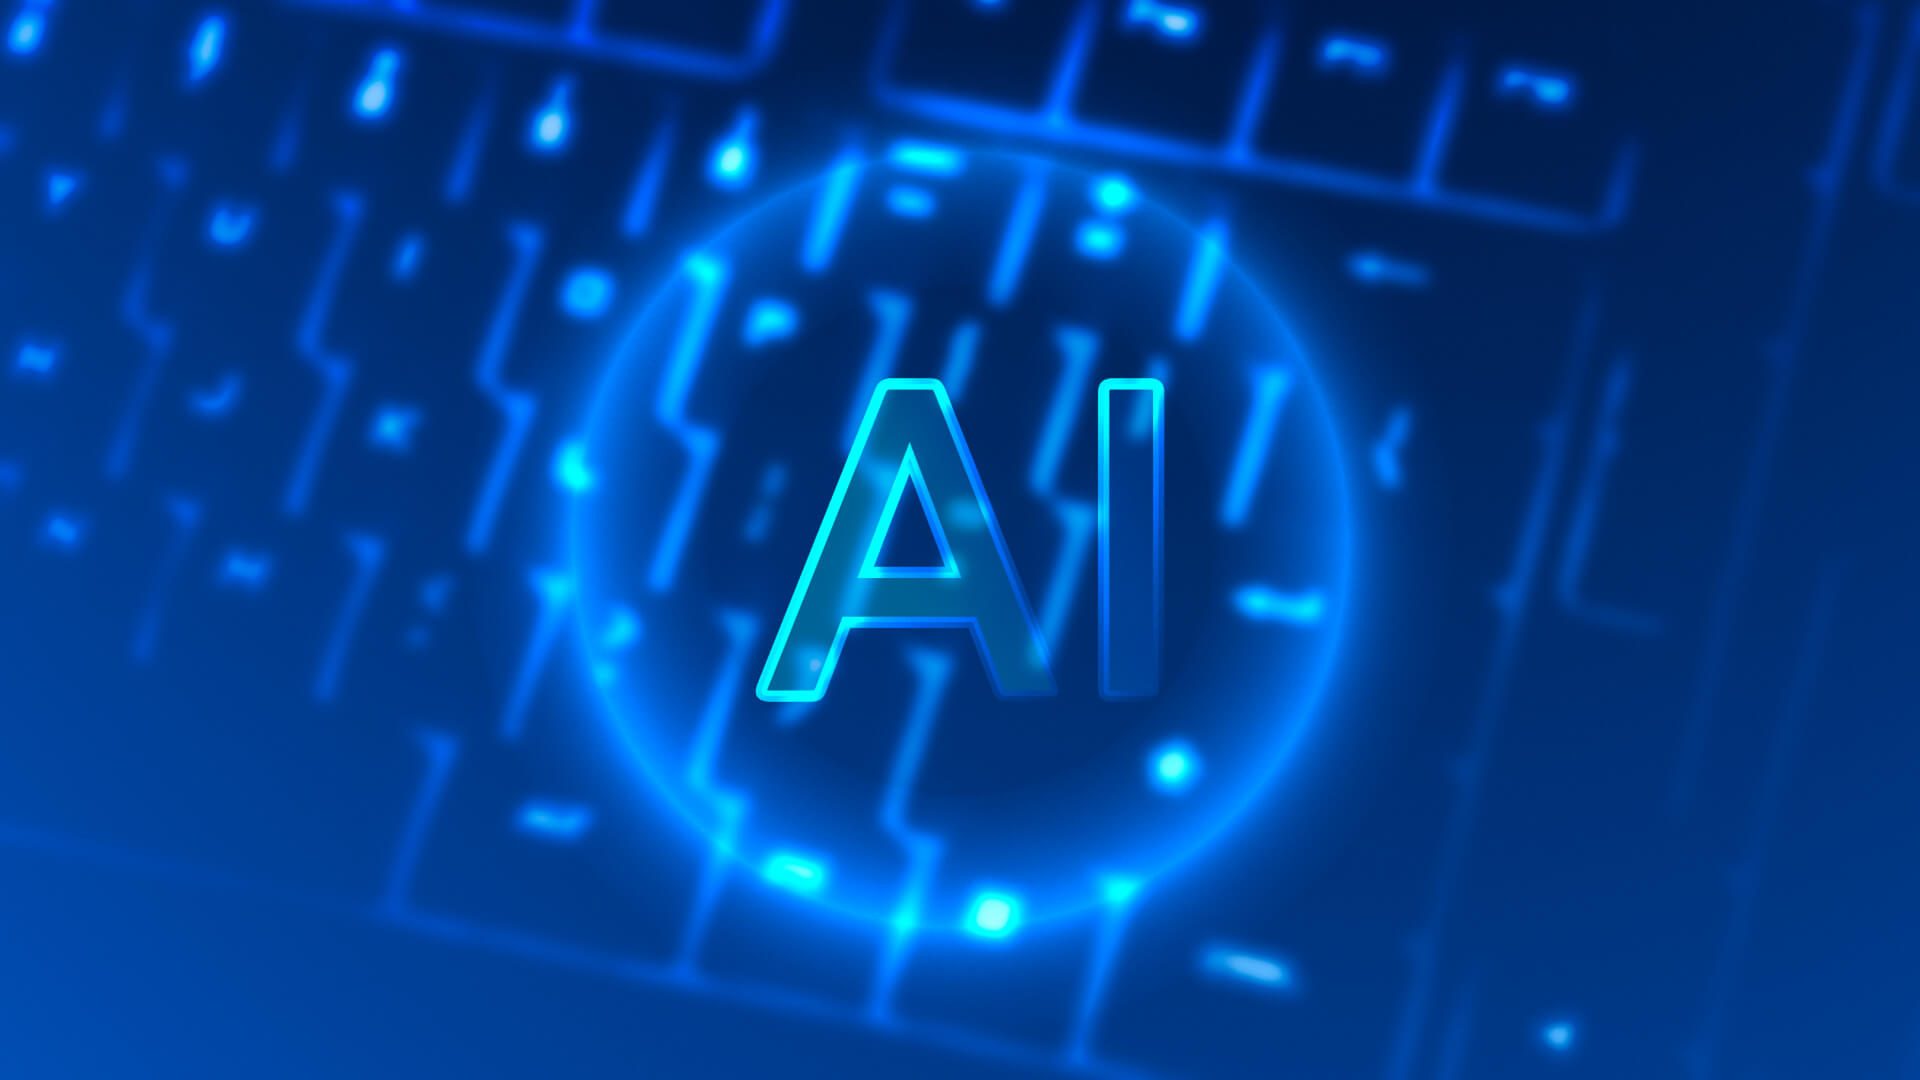 a neon blue digital background with circuit-like patterns and the letters AI prominently displayed in the center